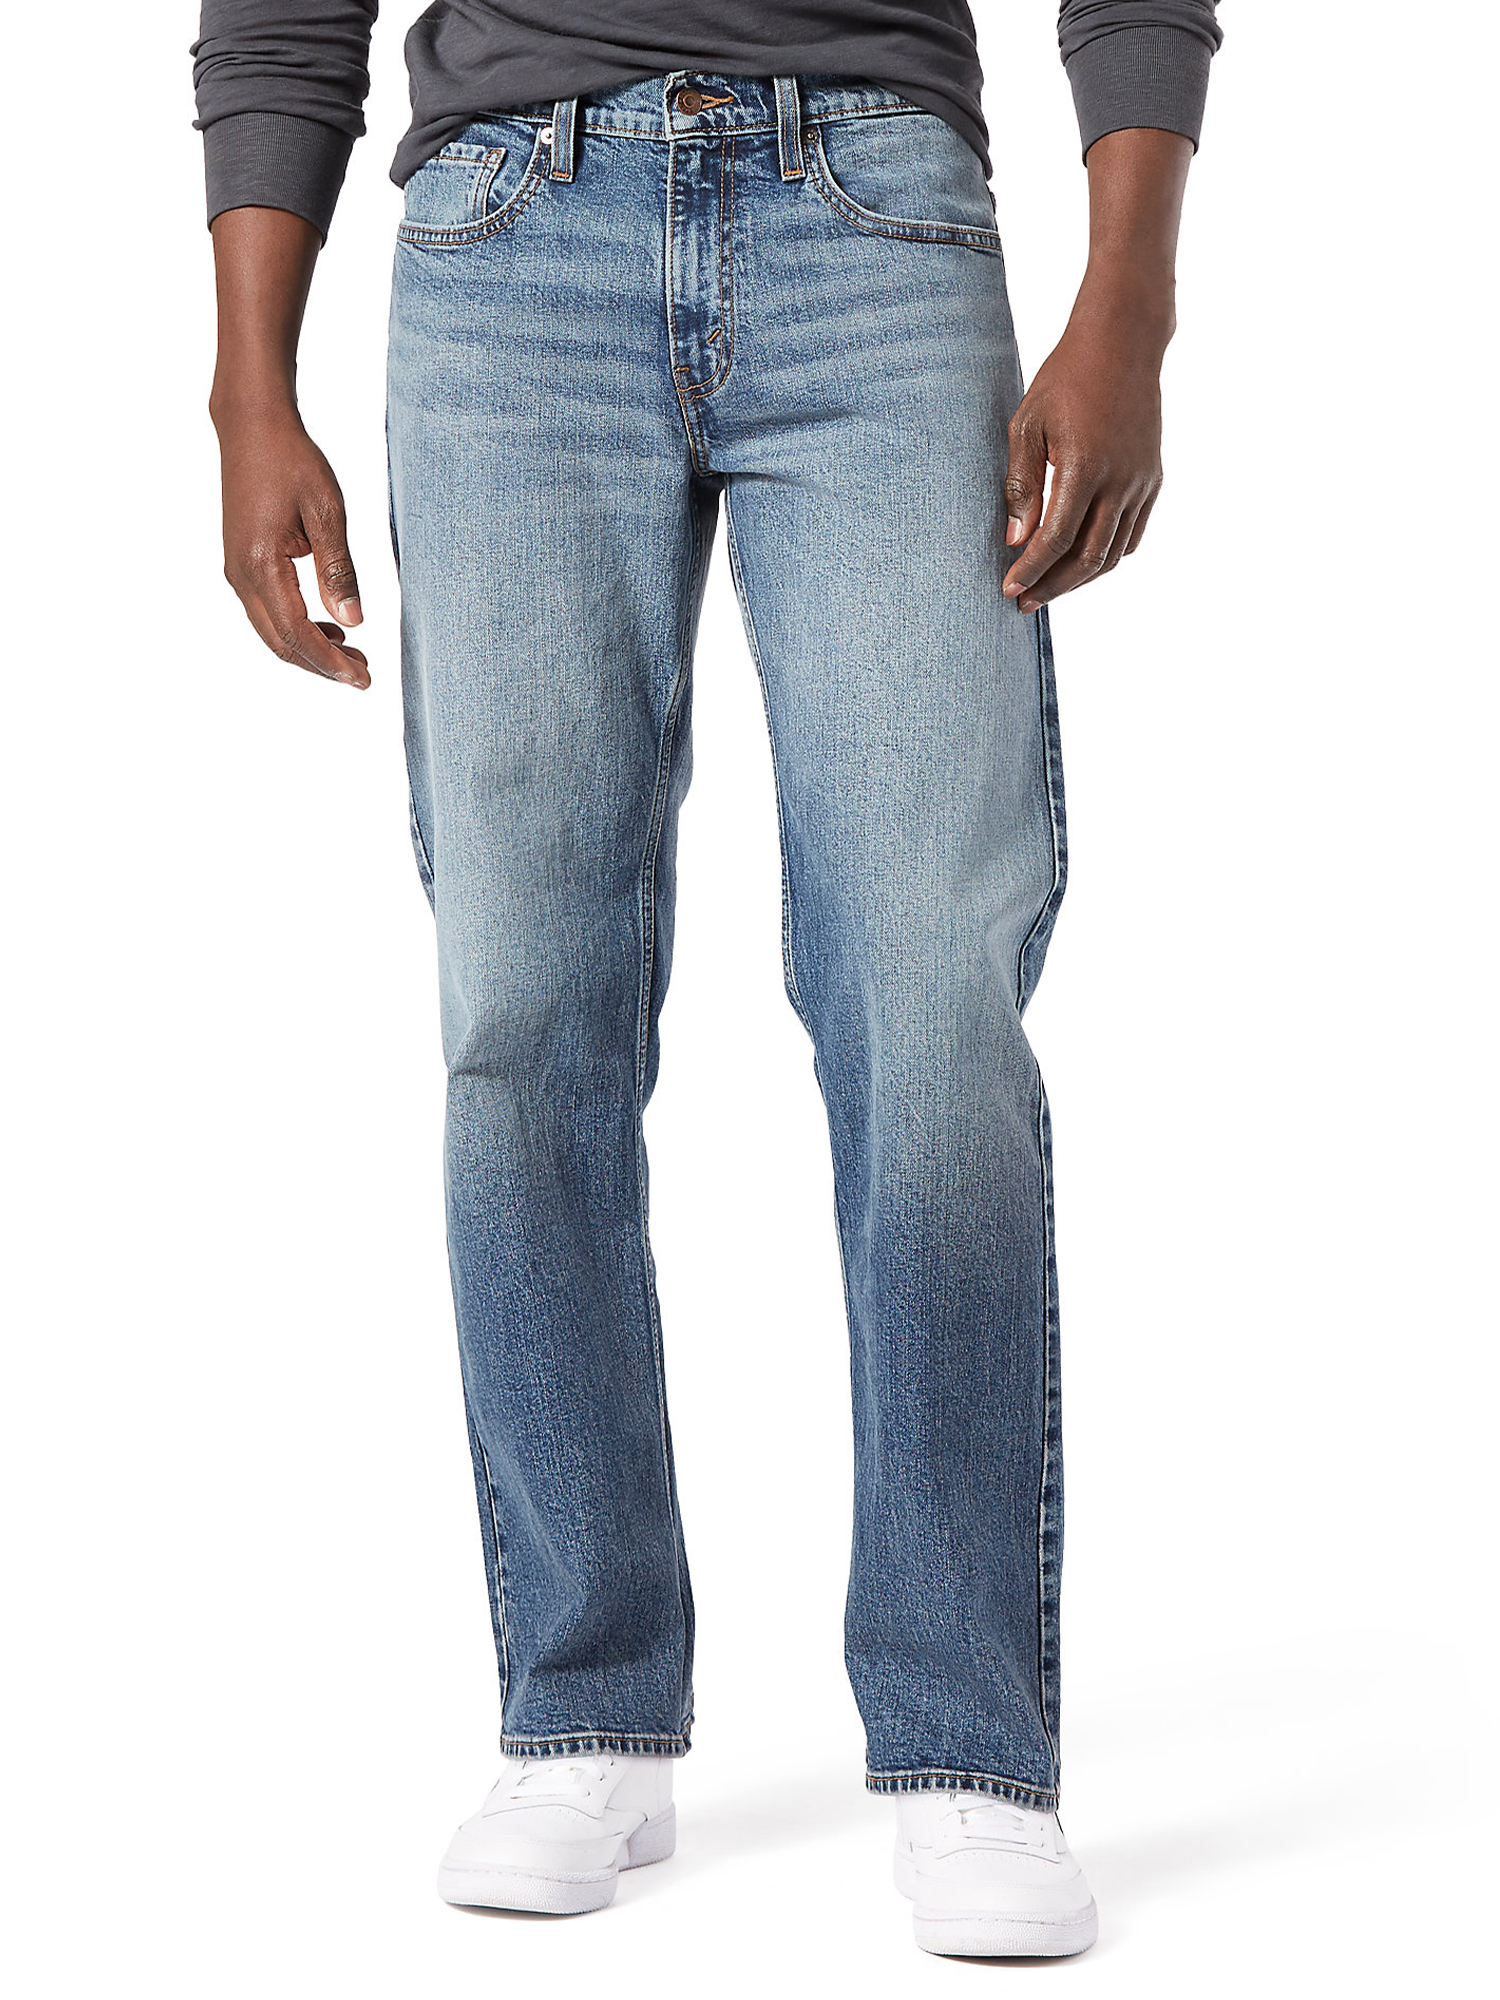 Signature By Levi Strauss & Co. Men's Loose Fit Jeans - Walmart.com